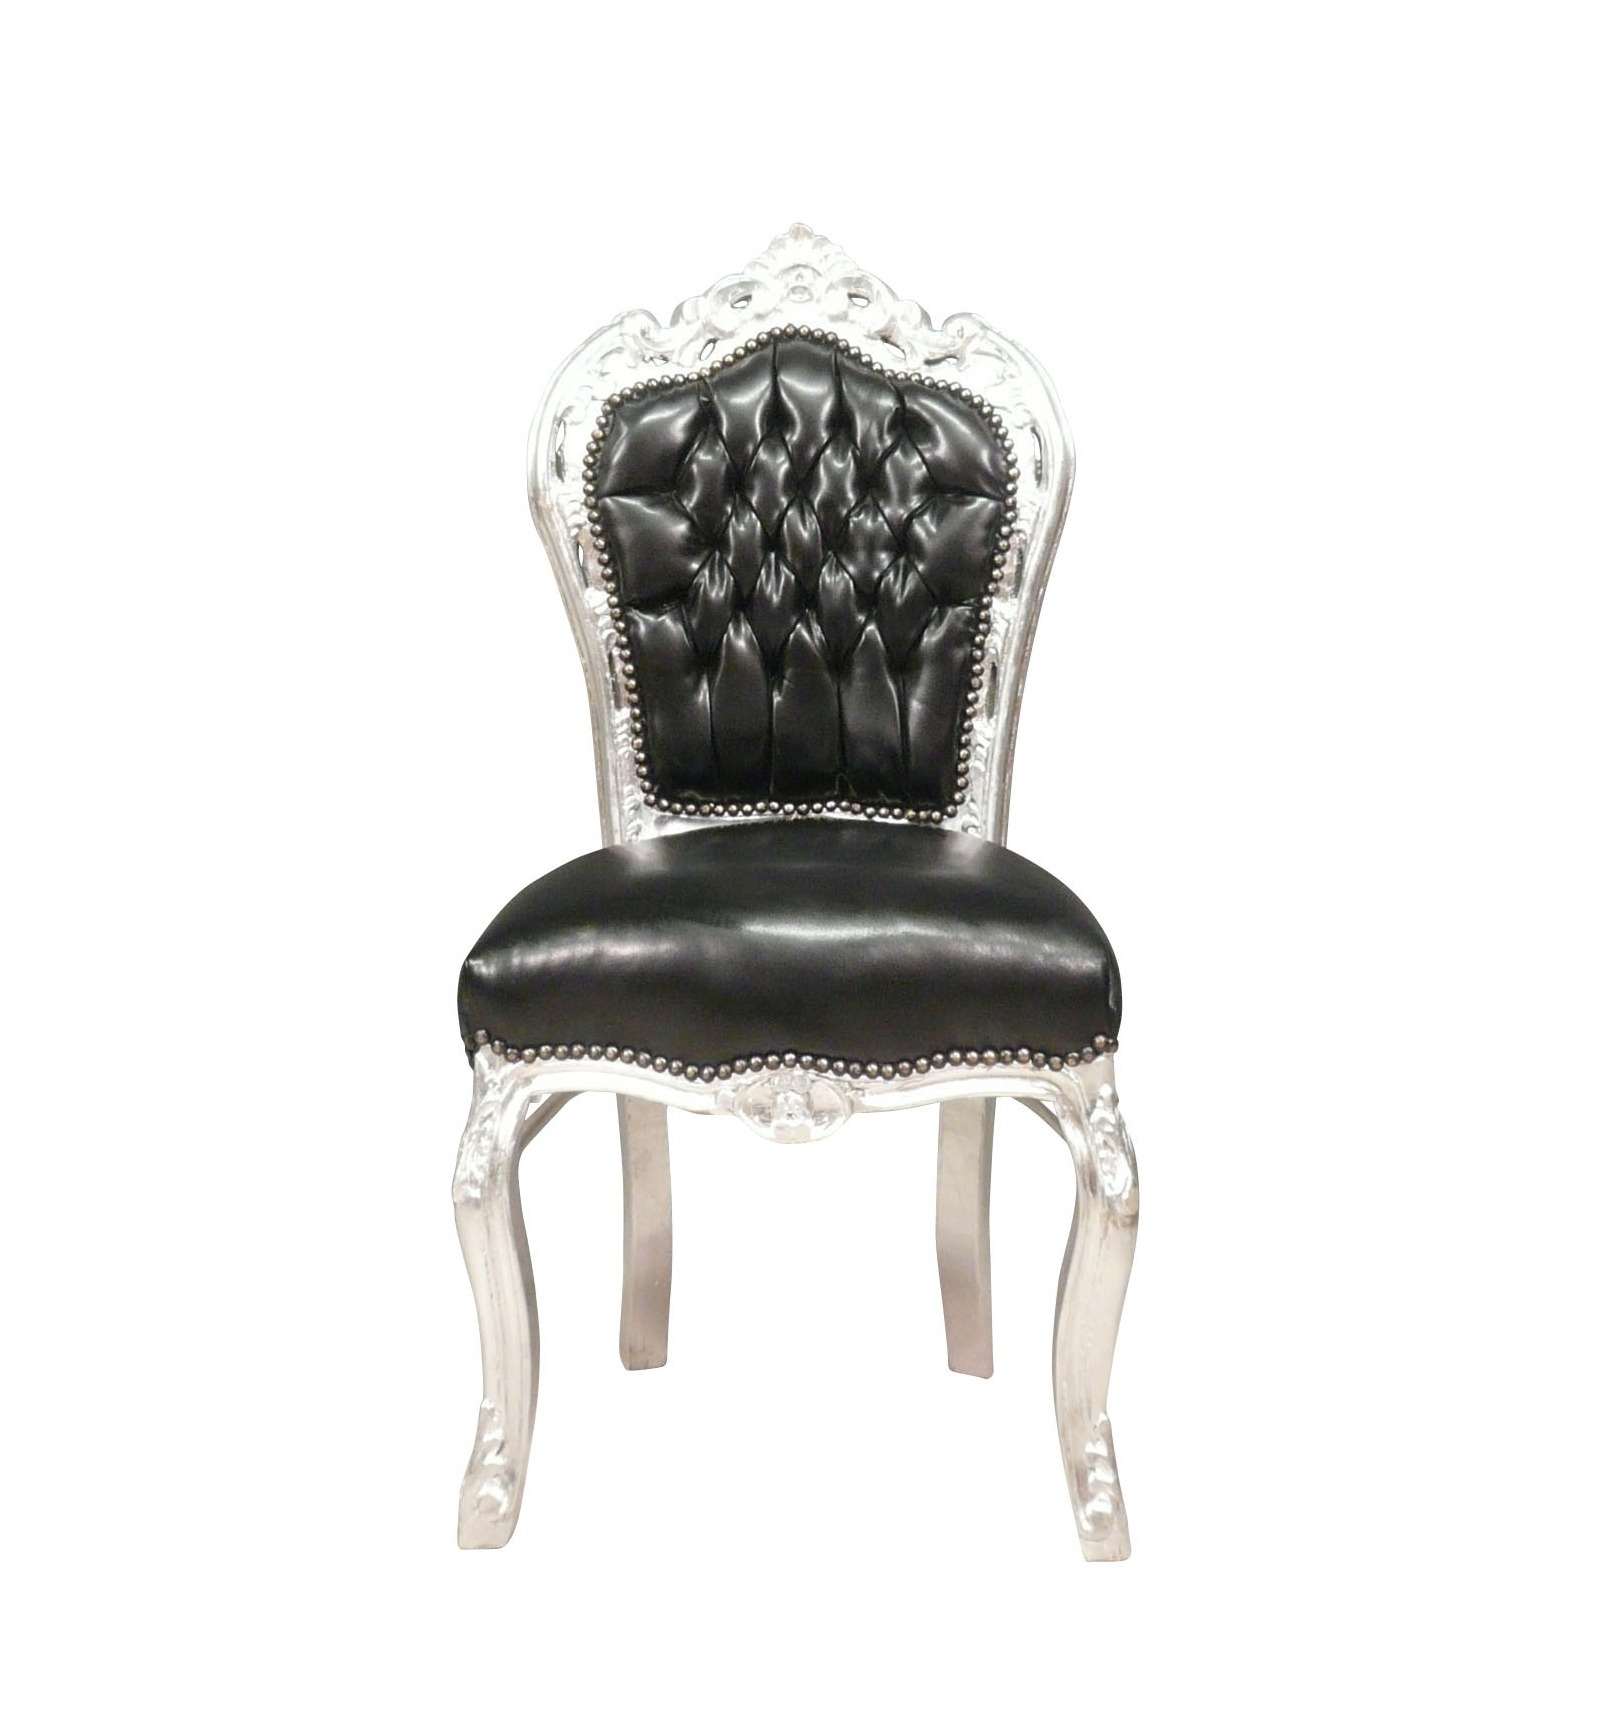 baroque chair black and silver imitation leather